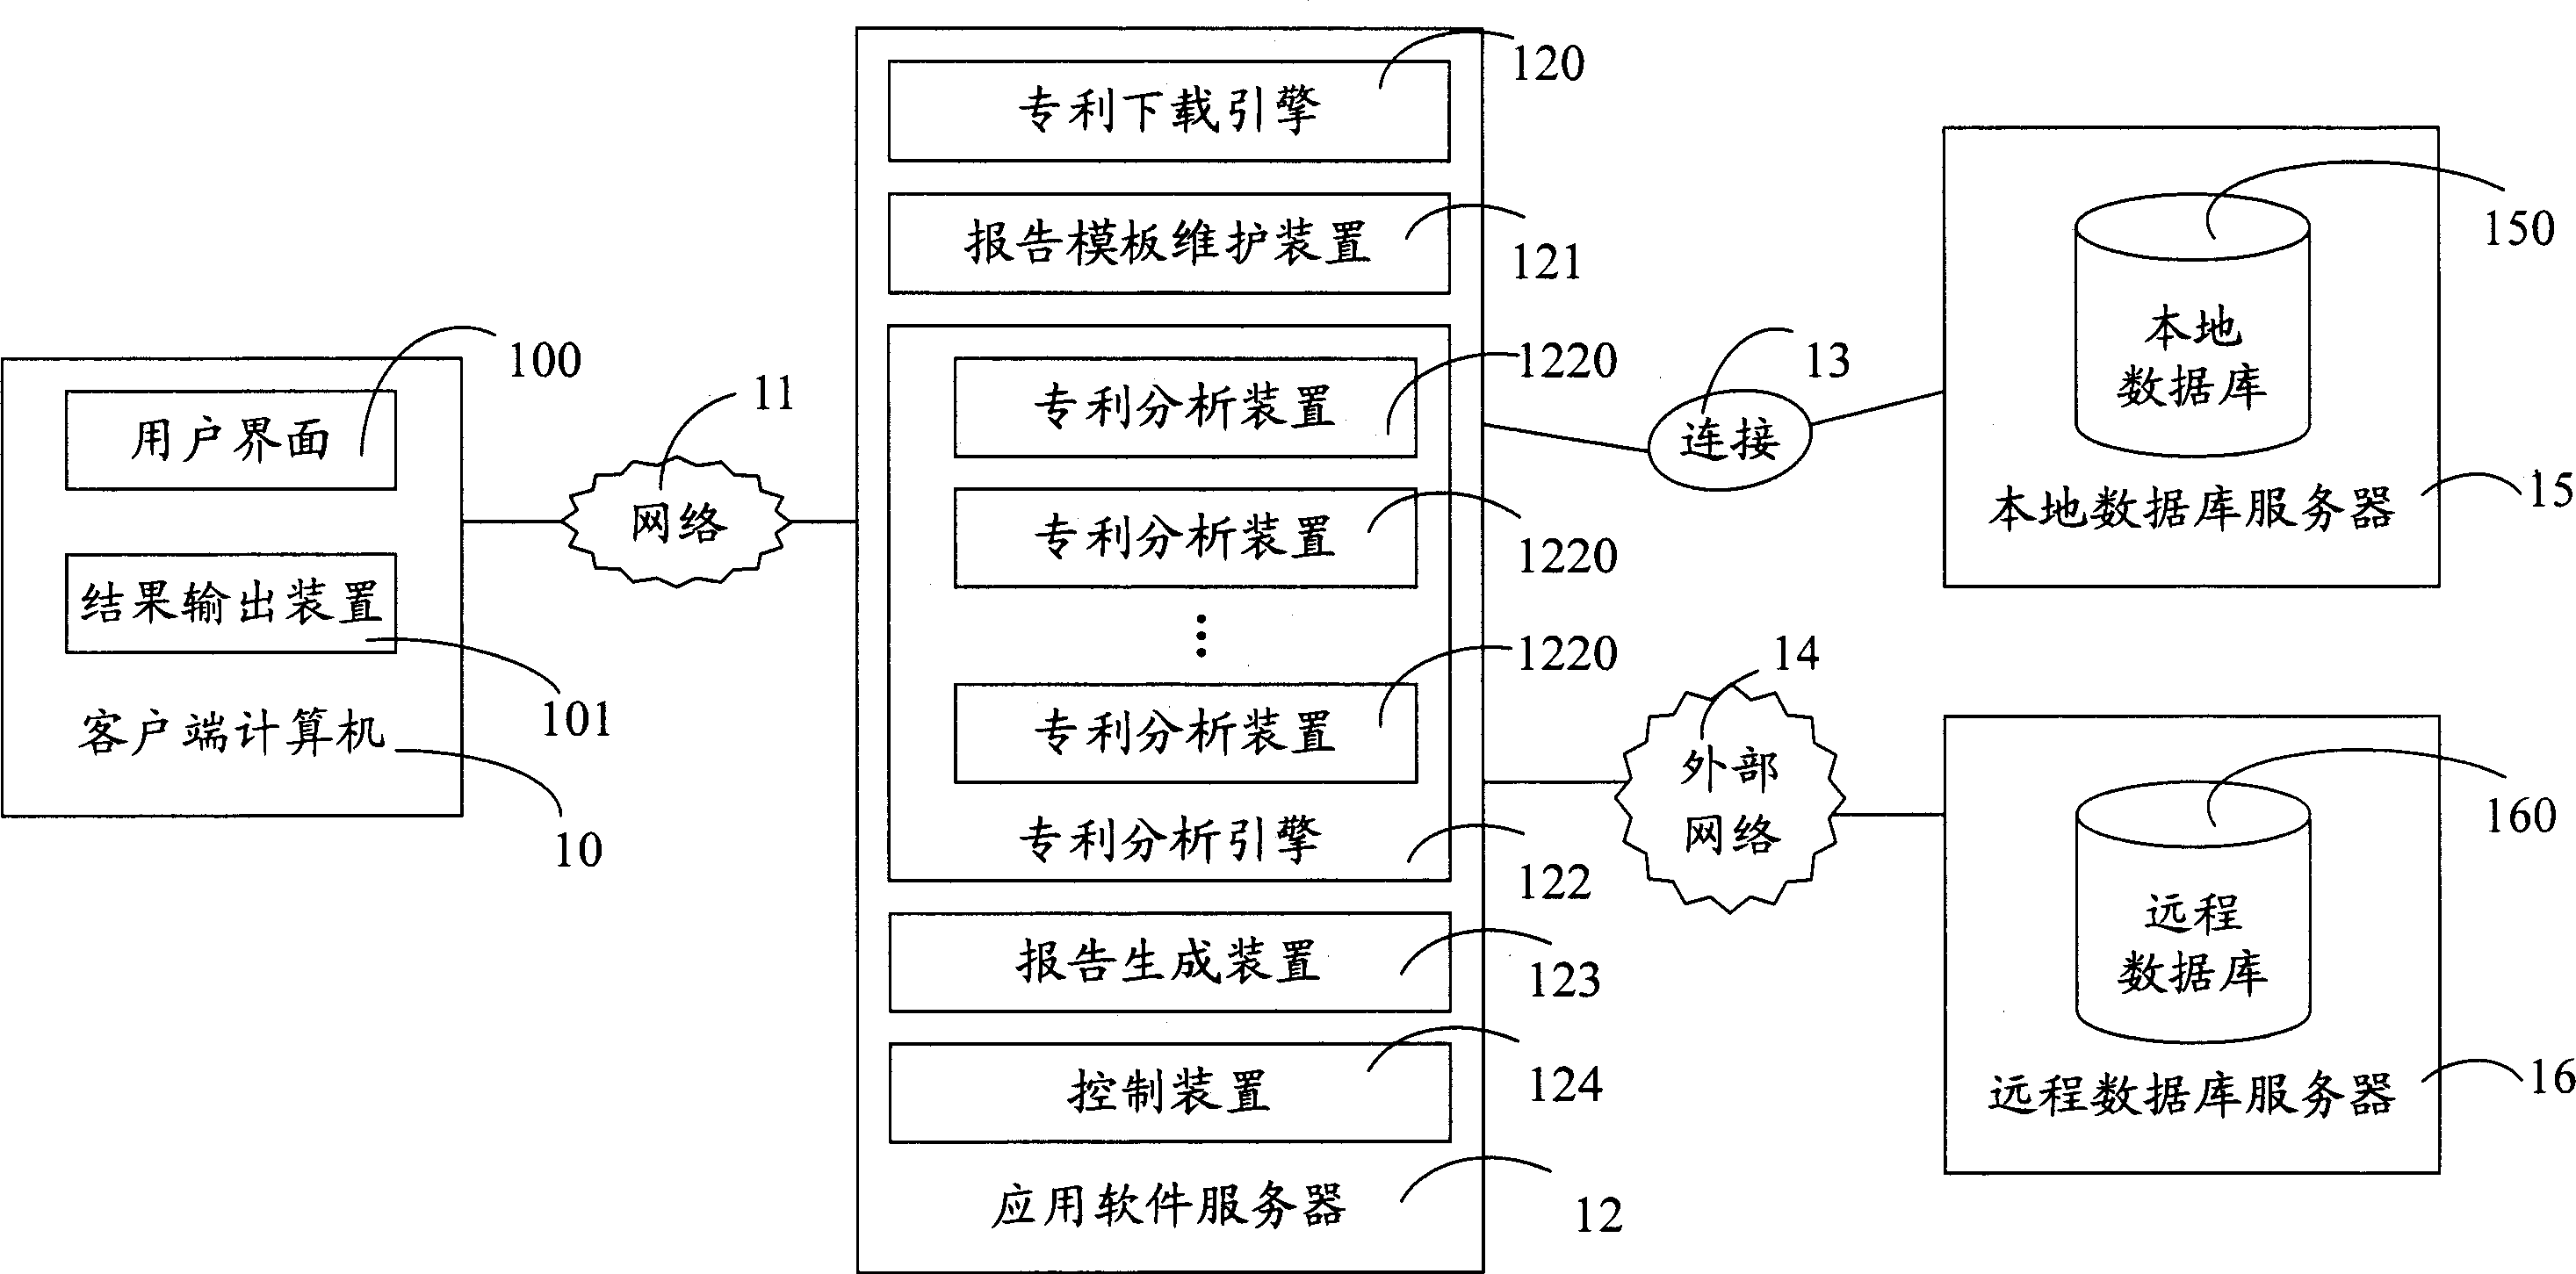 Automatically forming system and method for patent analysis report